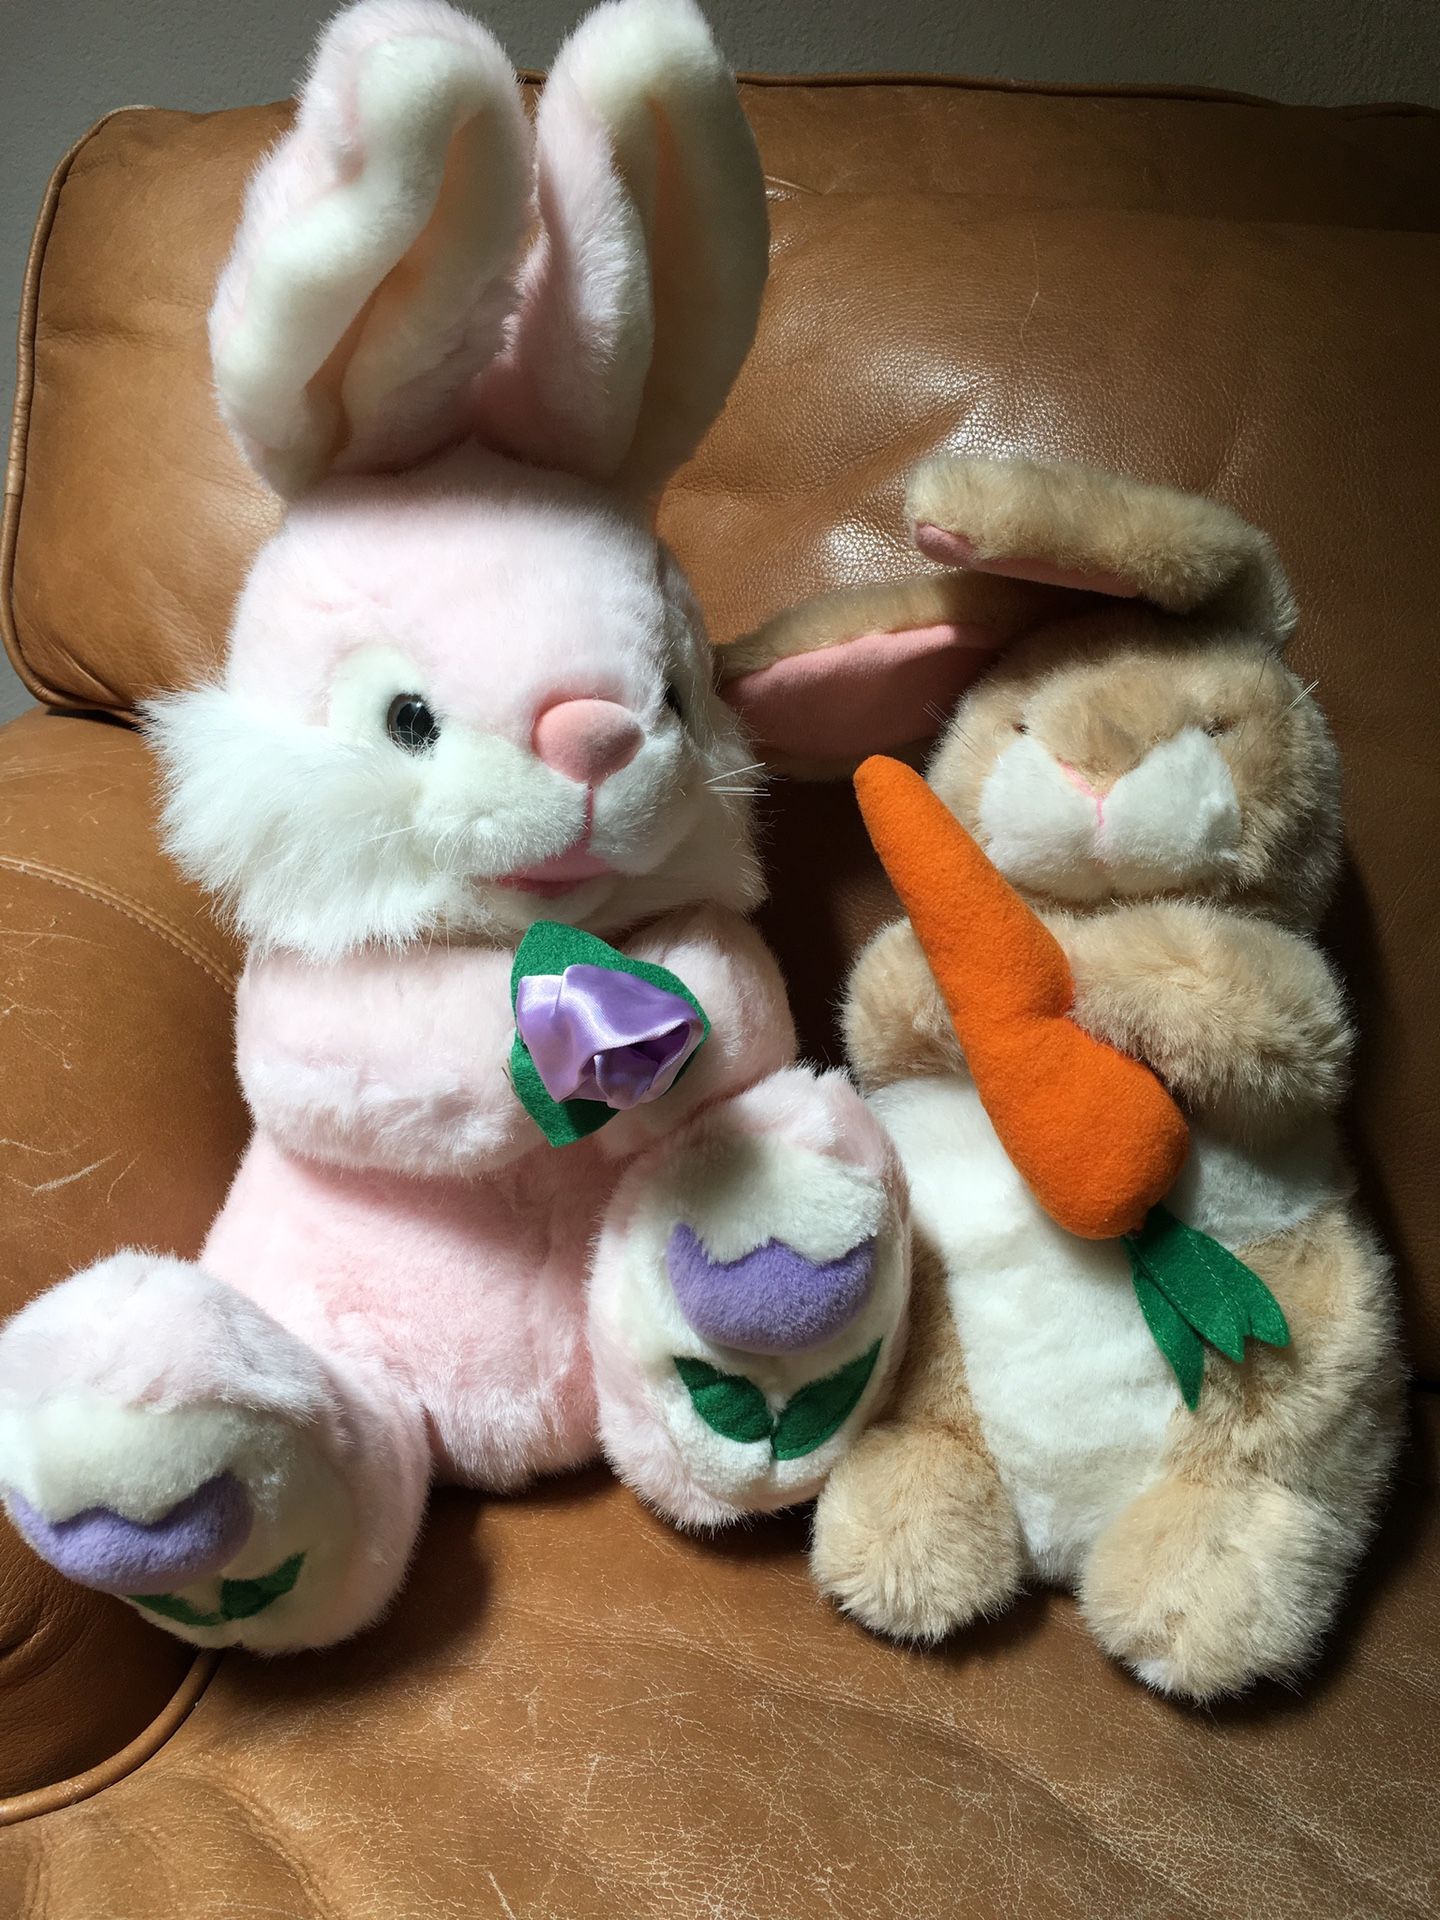 2 brand new soft plush bunnies both for $8